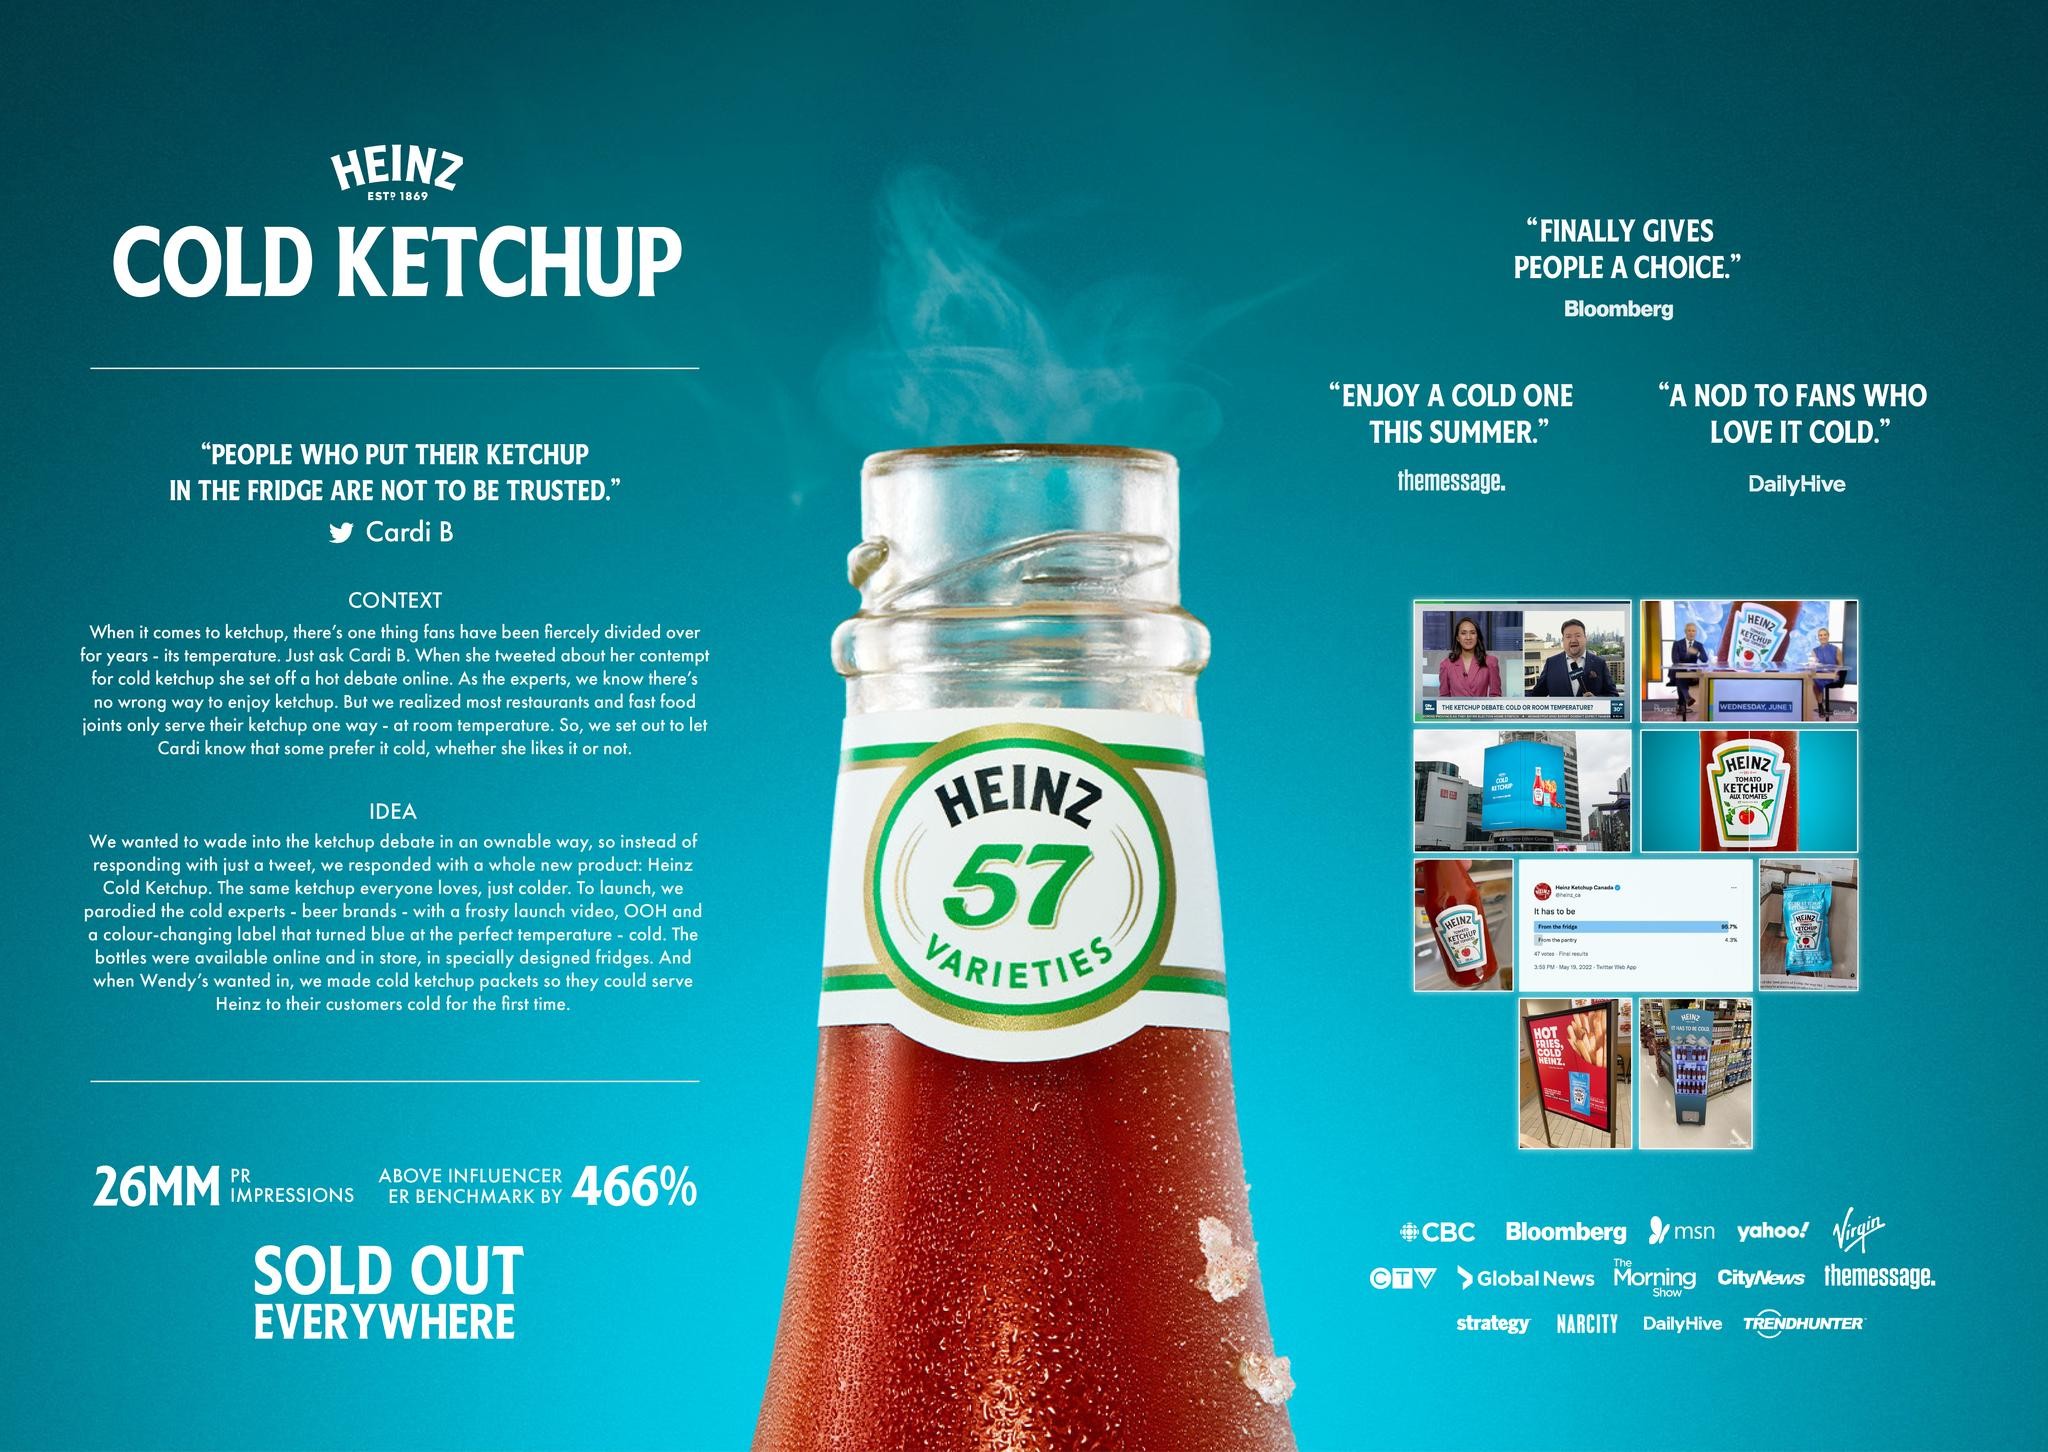 Heinz Cold Ketchup